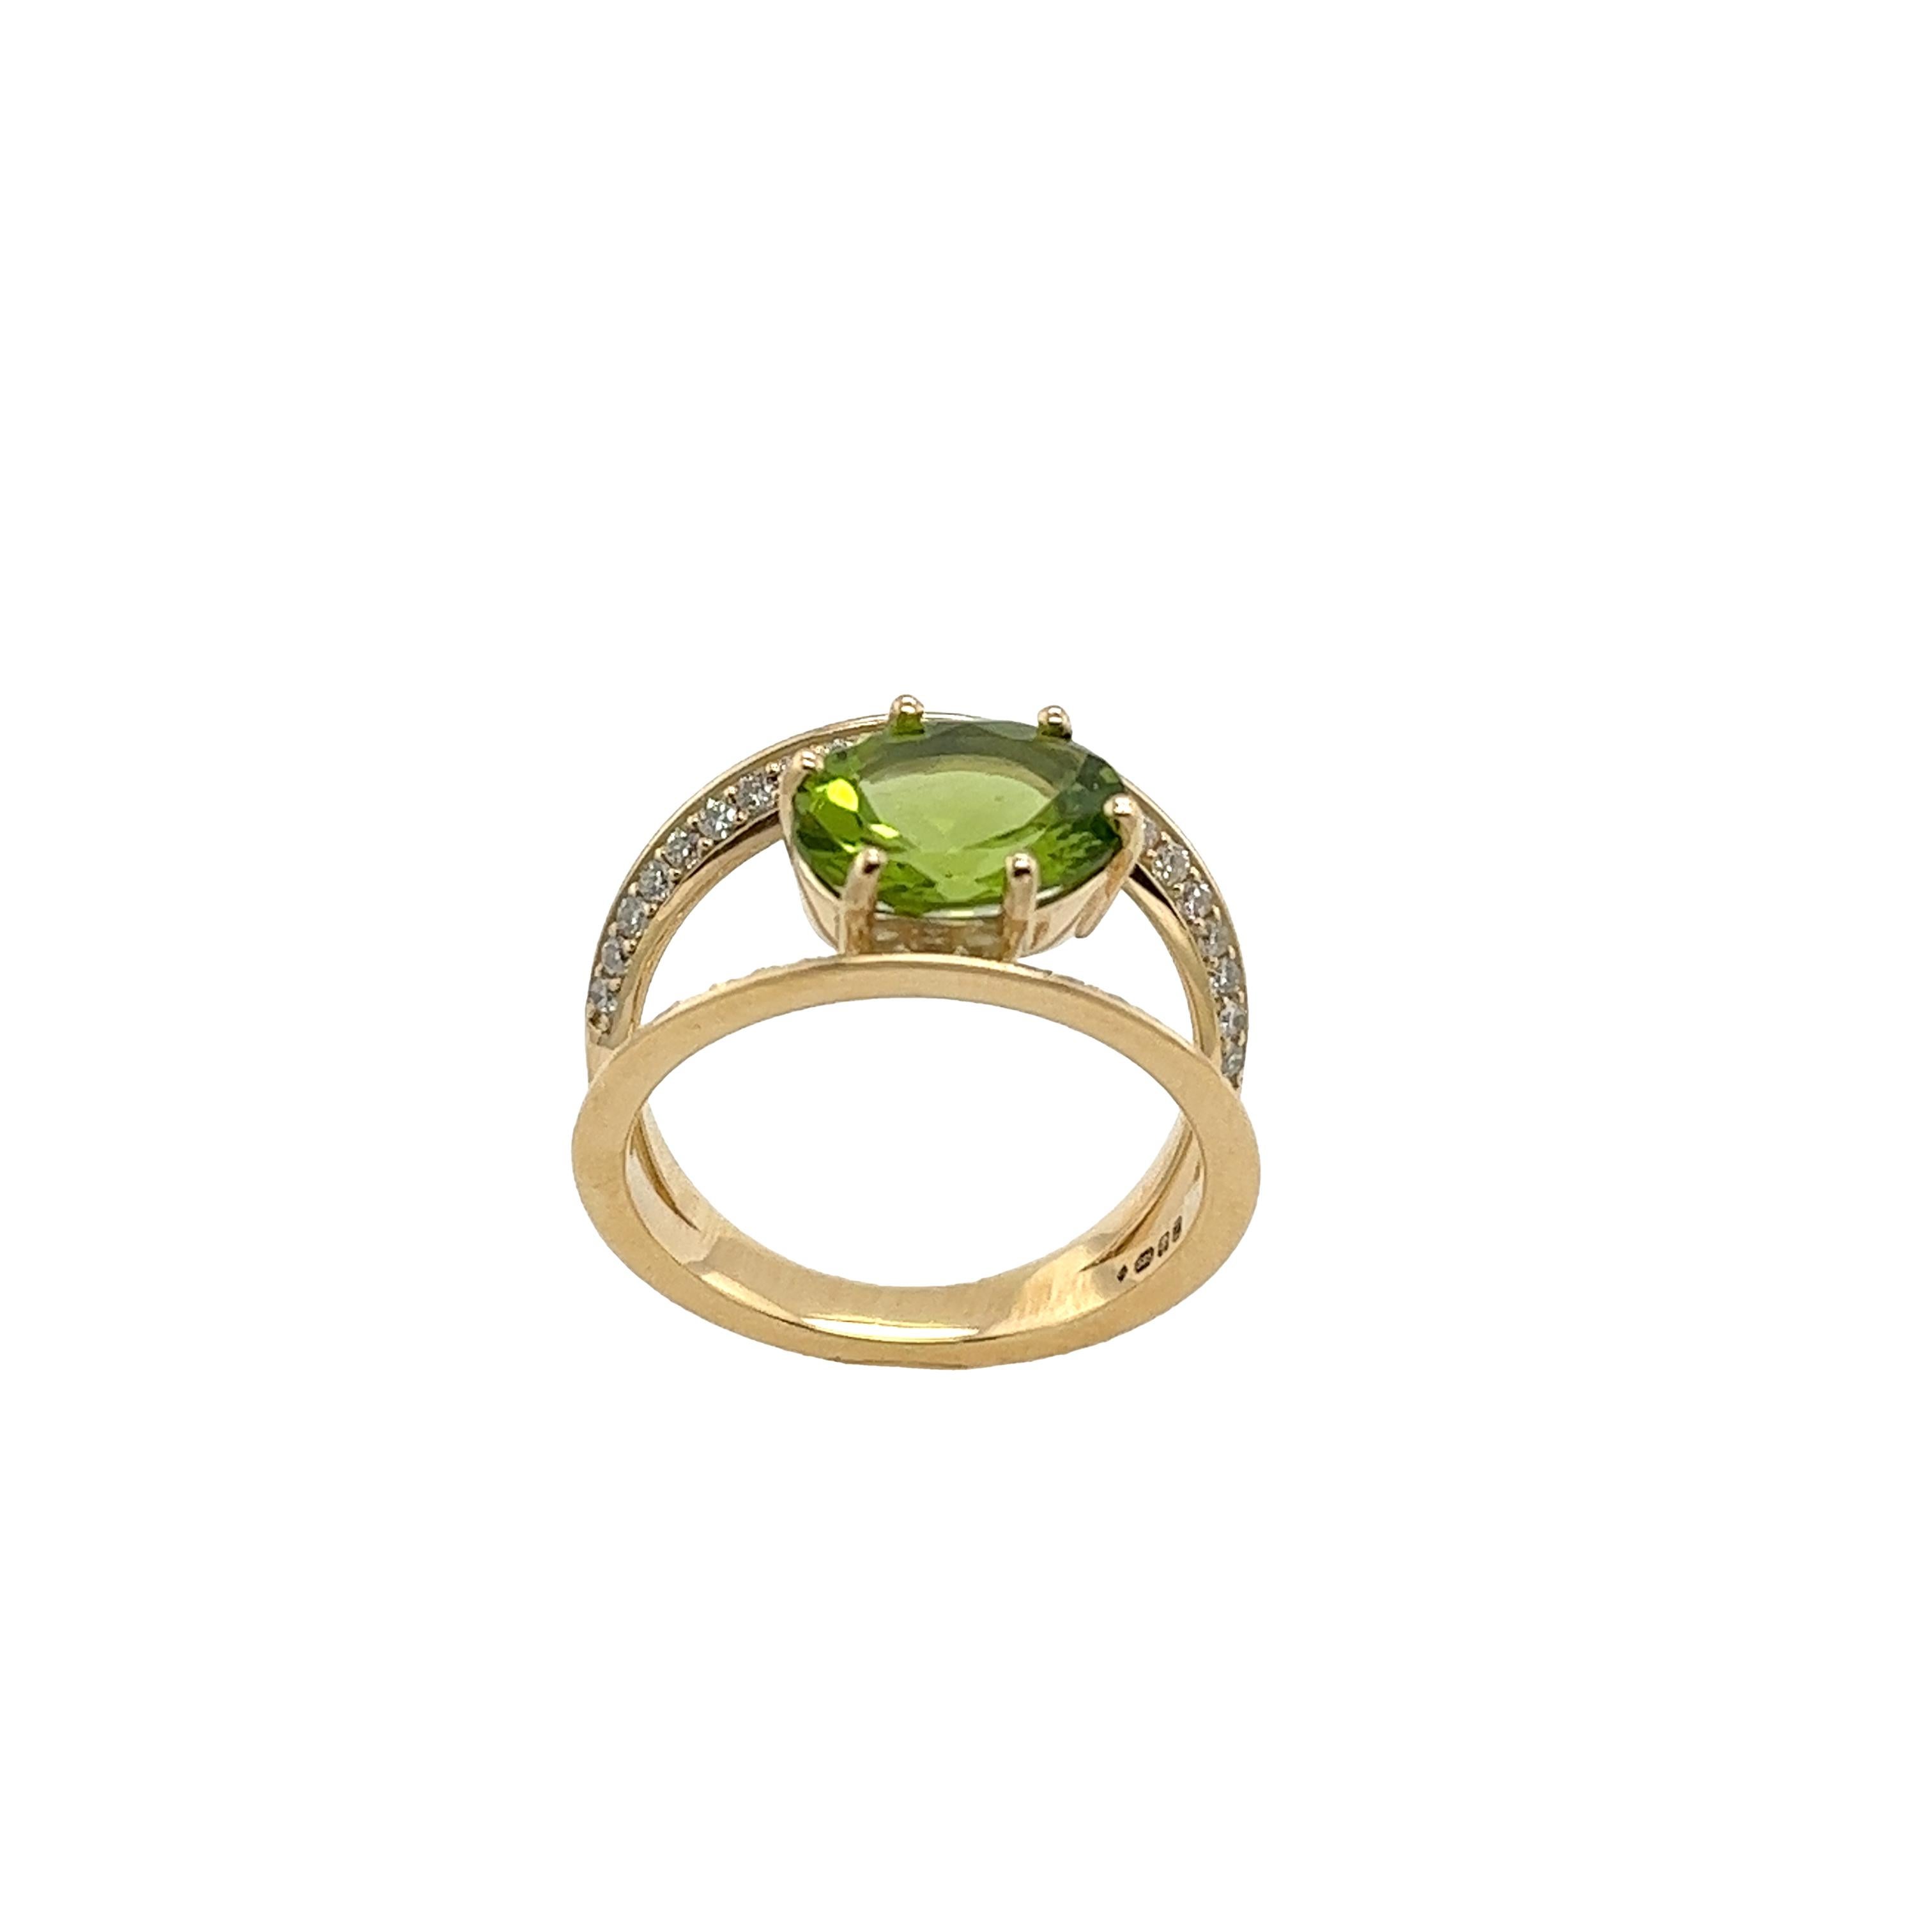 A 14ct Yellow Gold Diamond & Peridot Ring 
with 0.30ct small diamonds on the shoulders is a stunning and unique piece.
 The 0.30ct small diamonds set along the shoulders of the ring 
add a sparkling touch of sophistication. 
These diamonds enhance